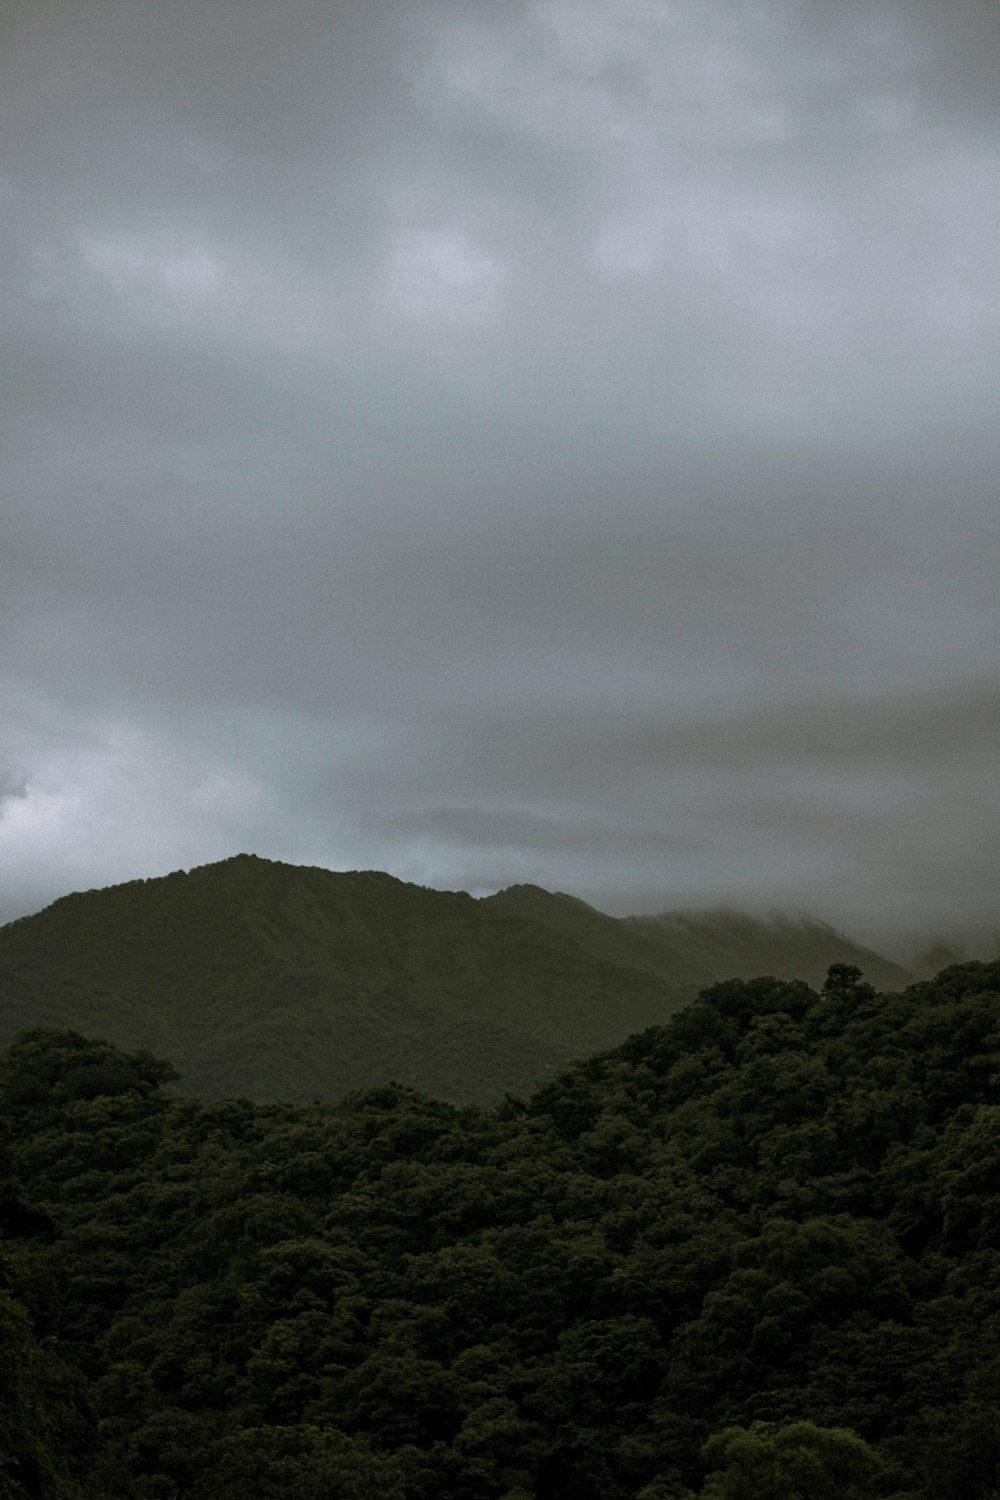 a hill with trees on it under a cloudy sky